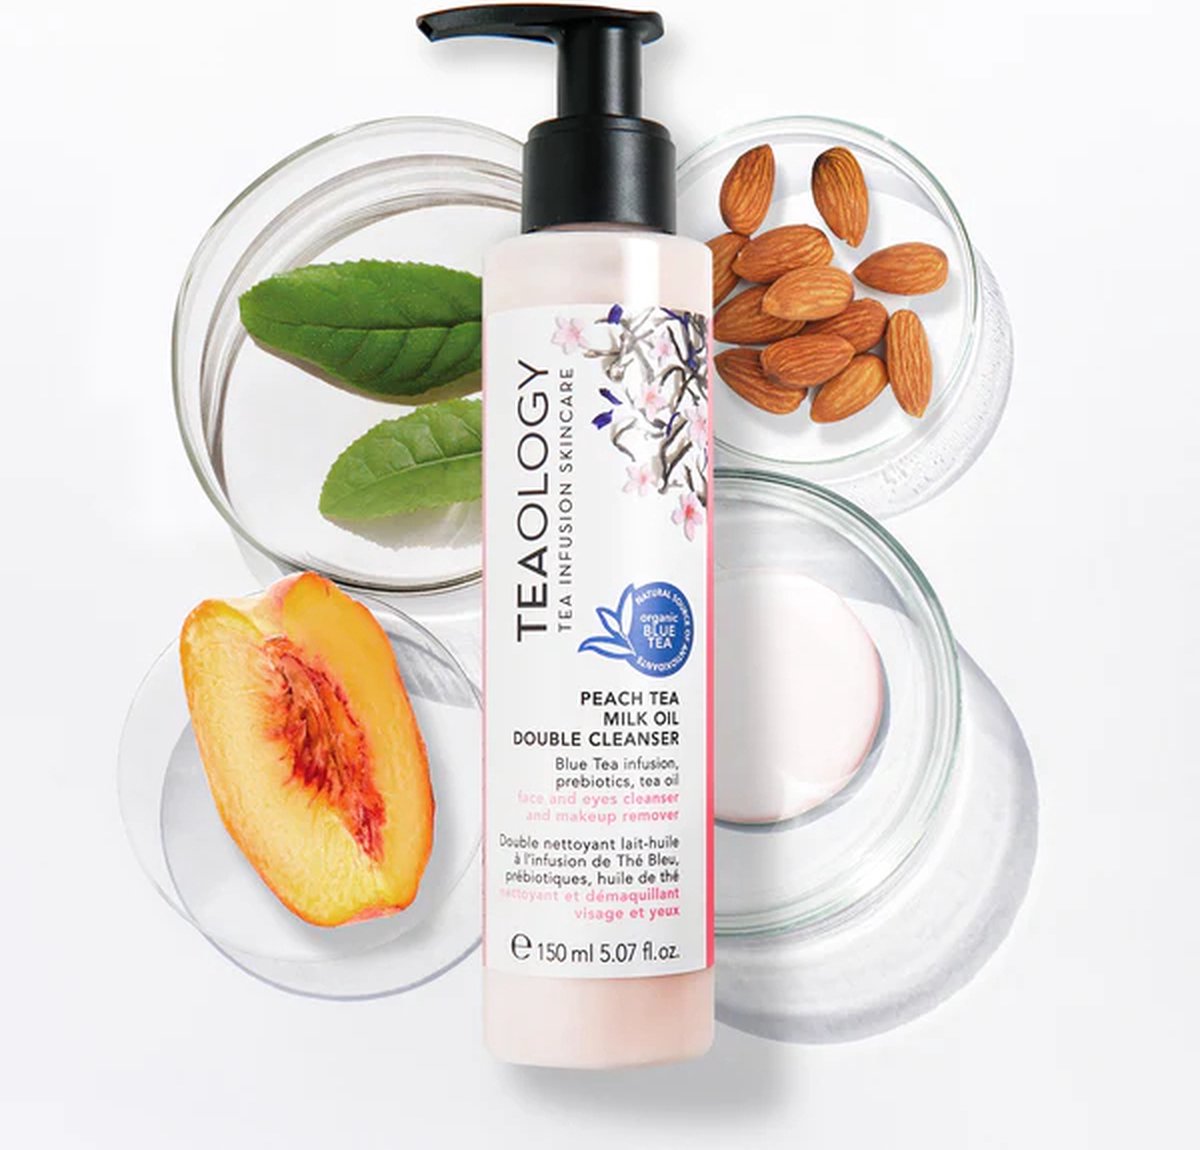 Teaology Peach Tea Milk-to-Oil Double Cleanser - 150 ml - make-up remover